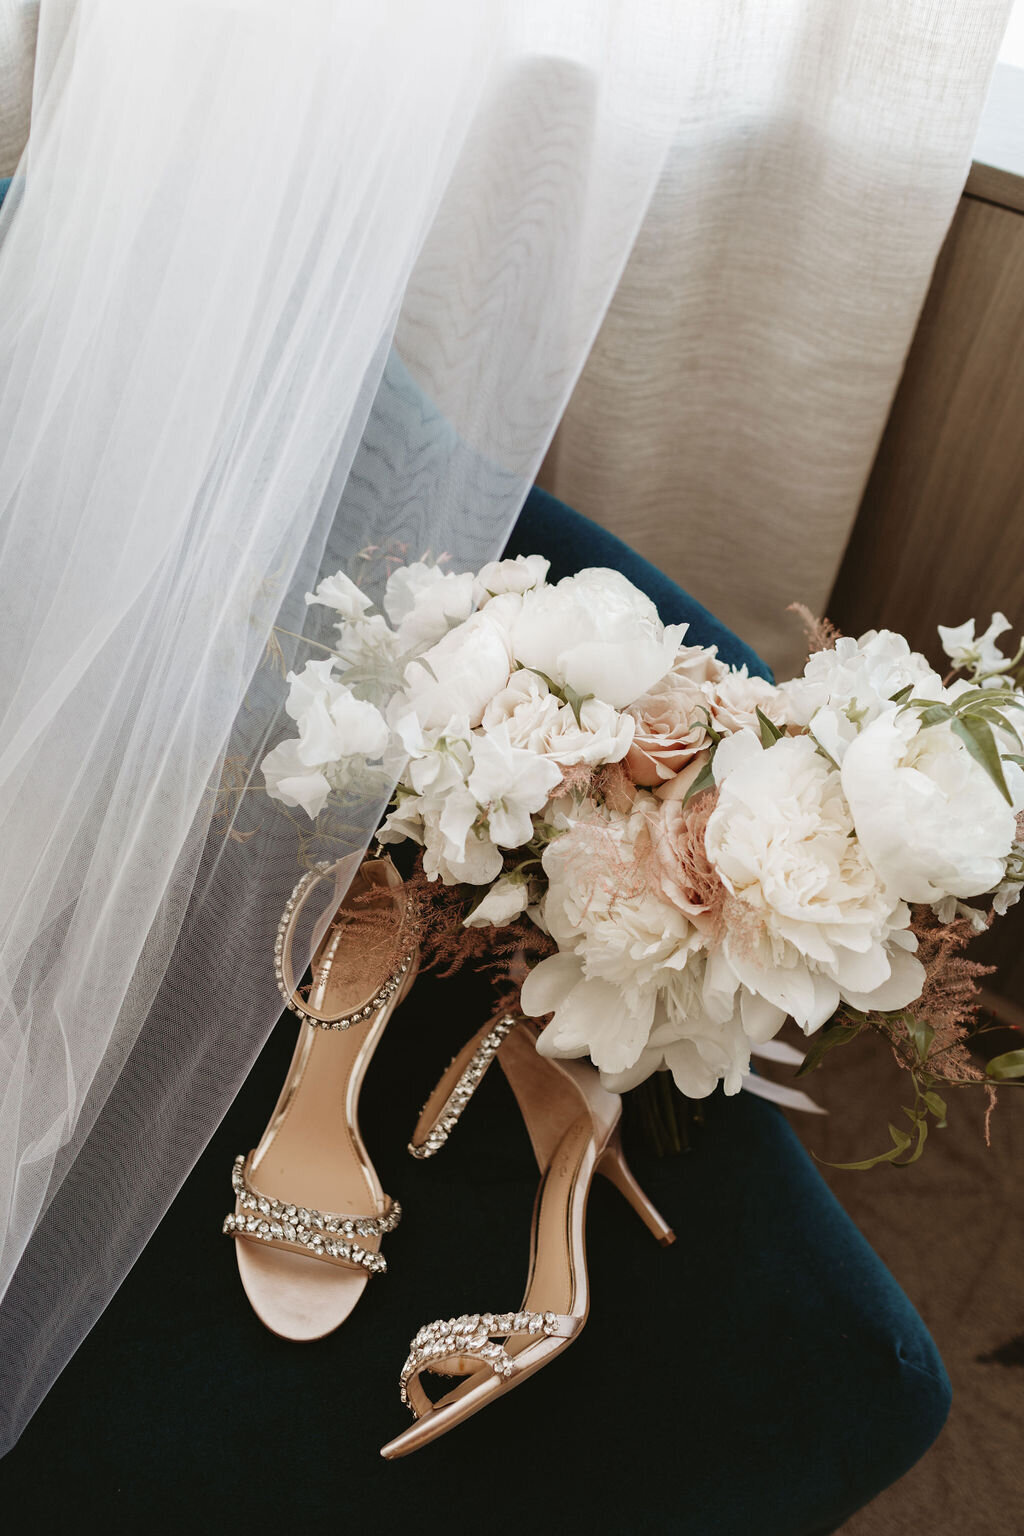 Bride's wedding shoes and bouquet.